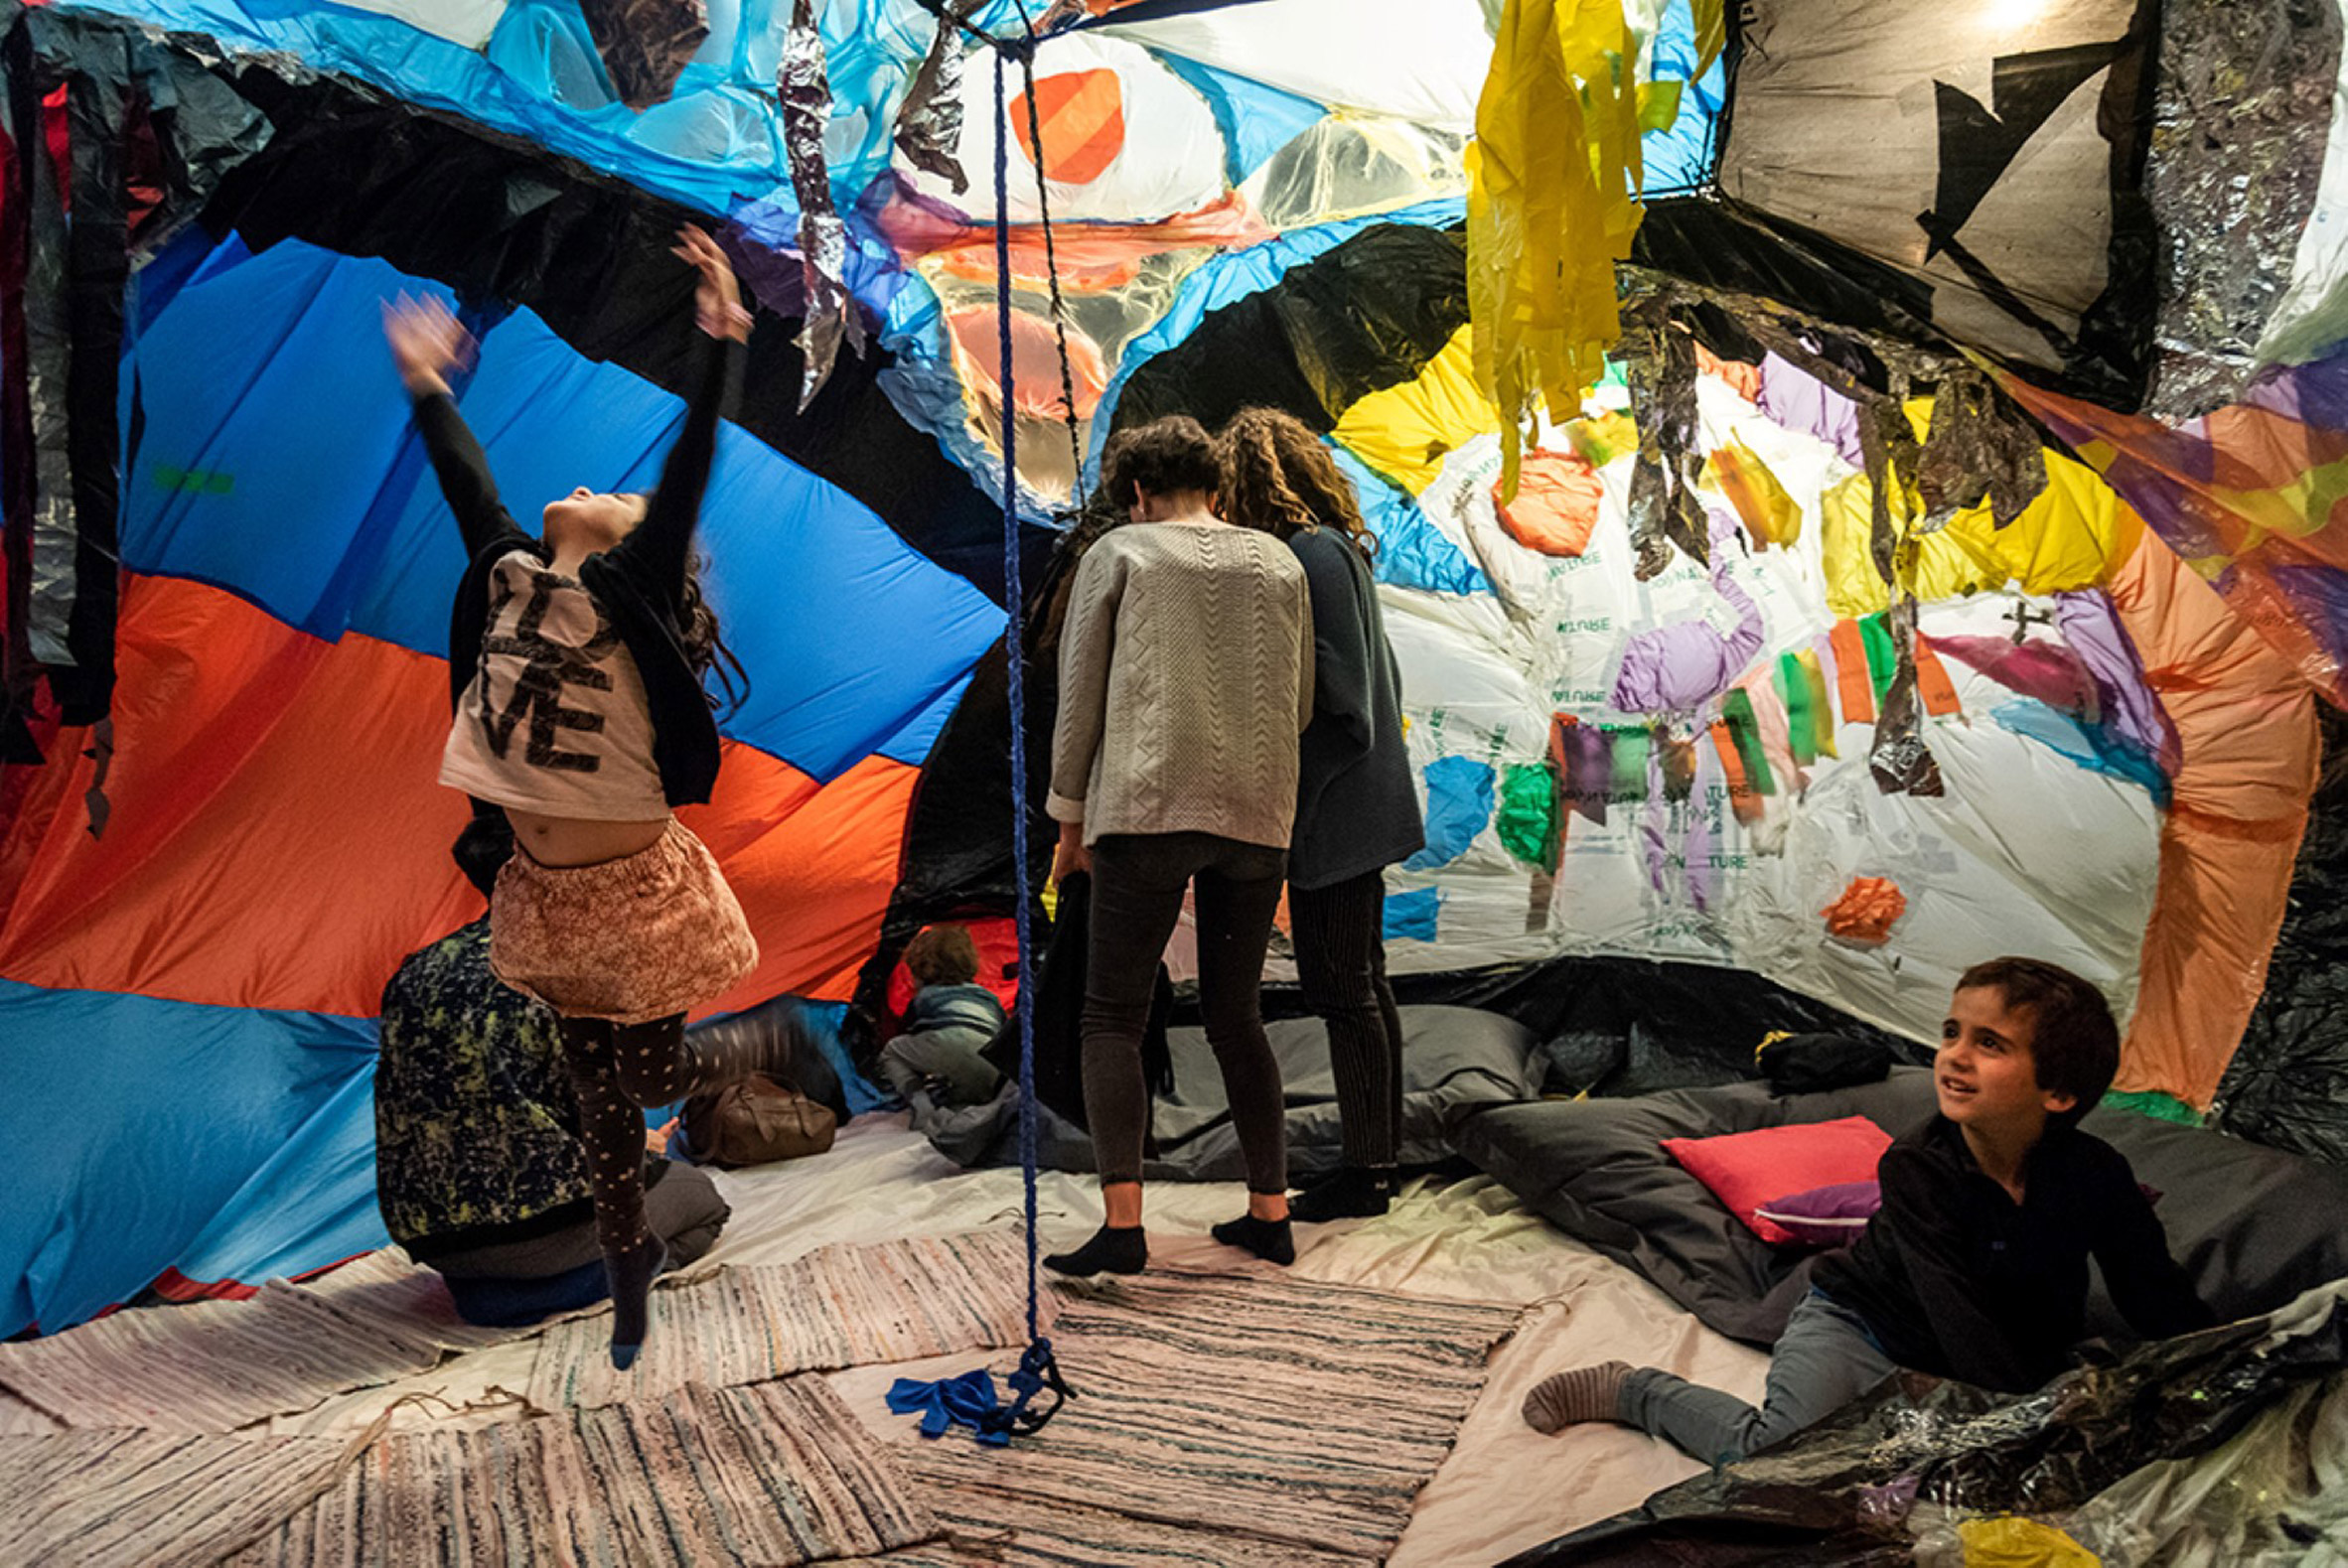 Textile colourful installation with children playing inside